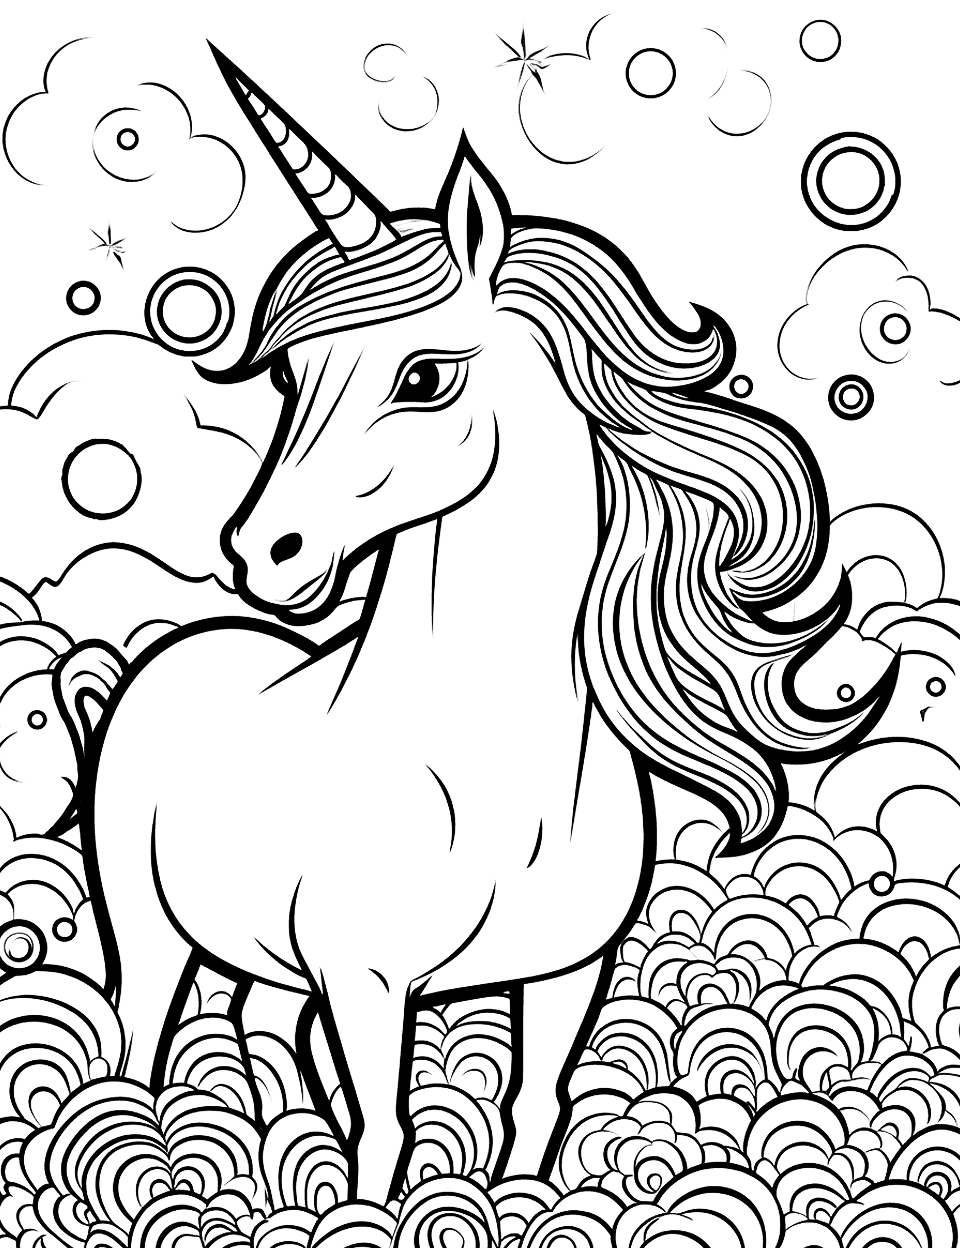 Unicorn and Pop Art Coloring Page - A unicorn design inspired by pop art, with bold colors and patterns.